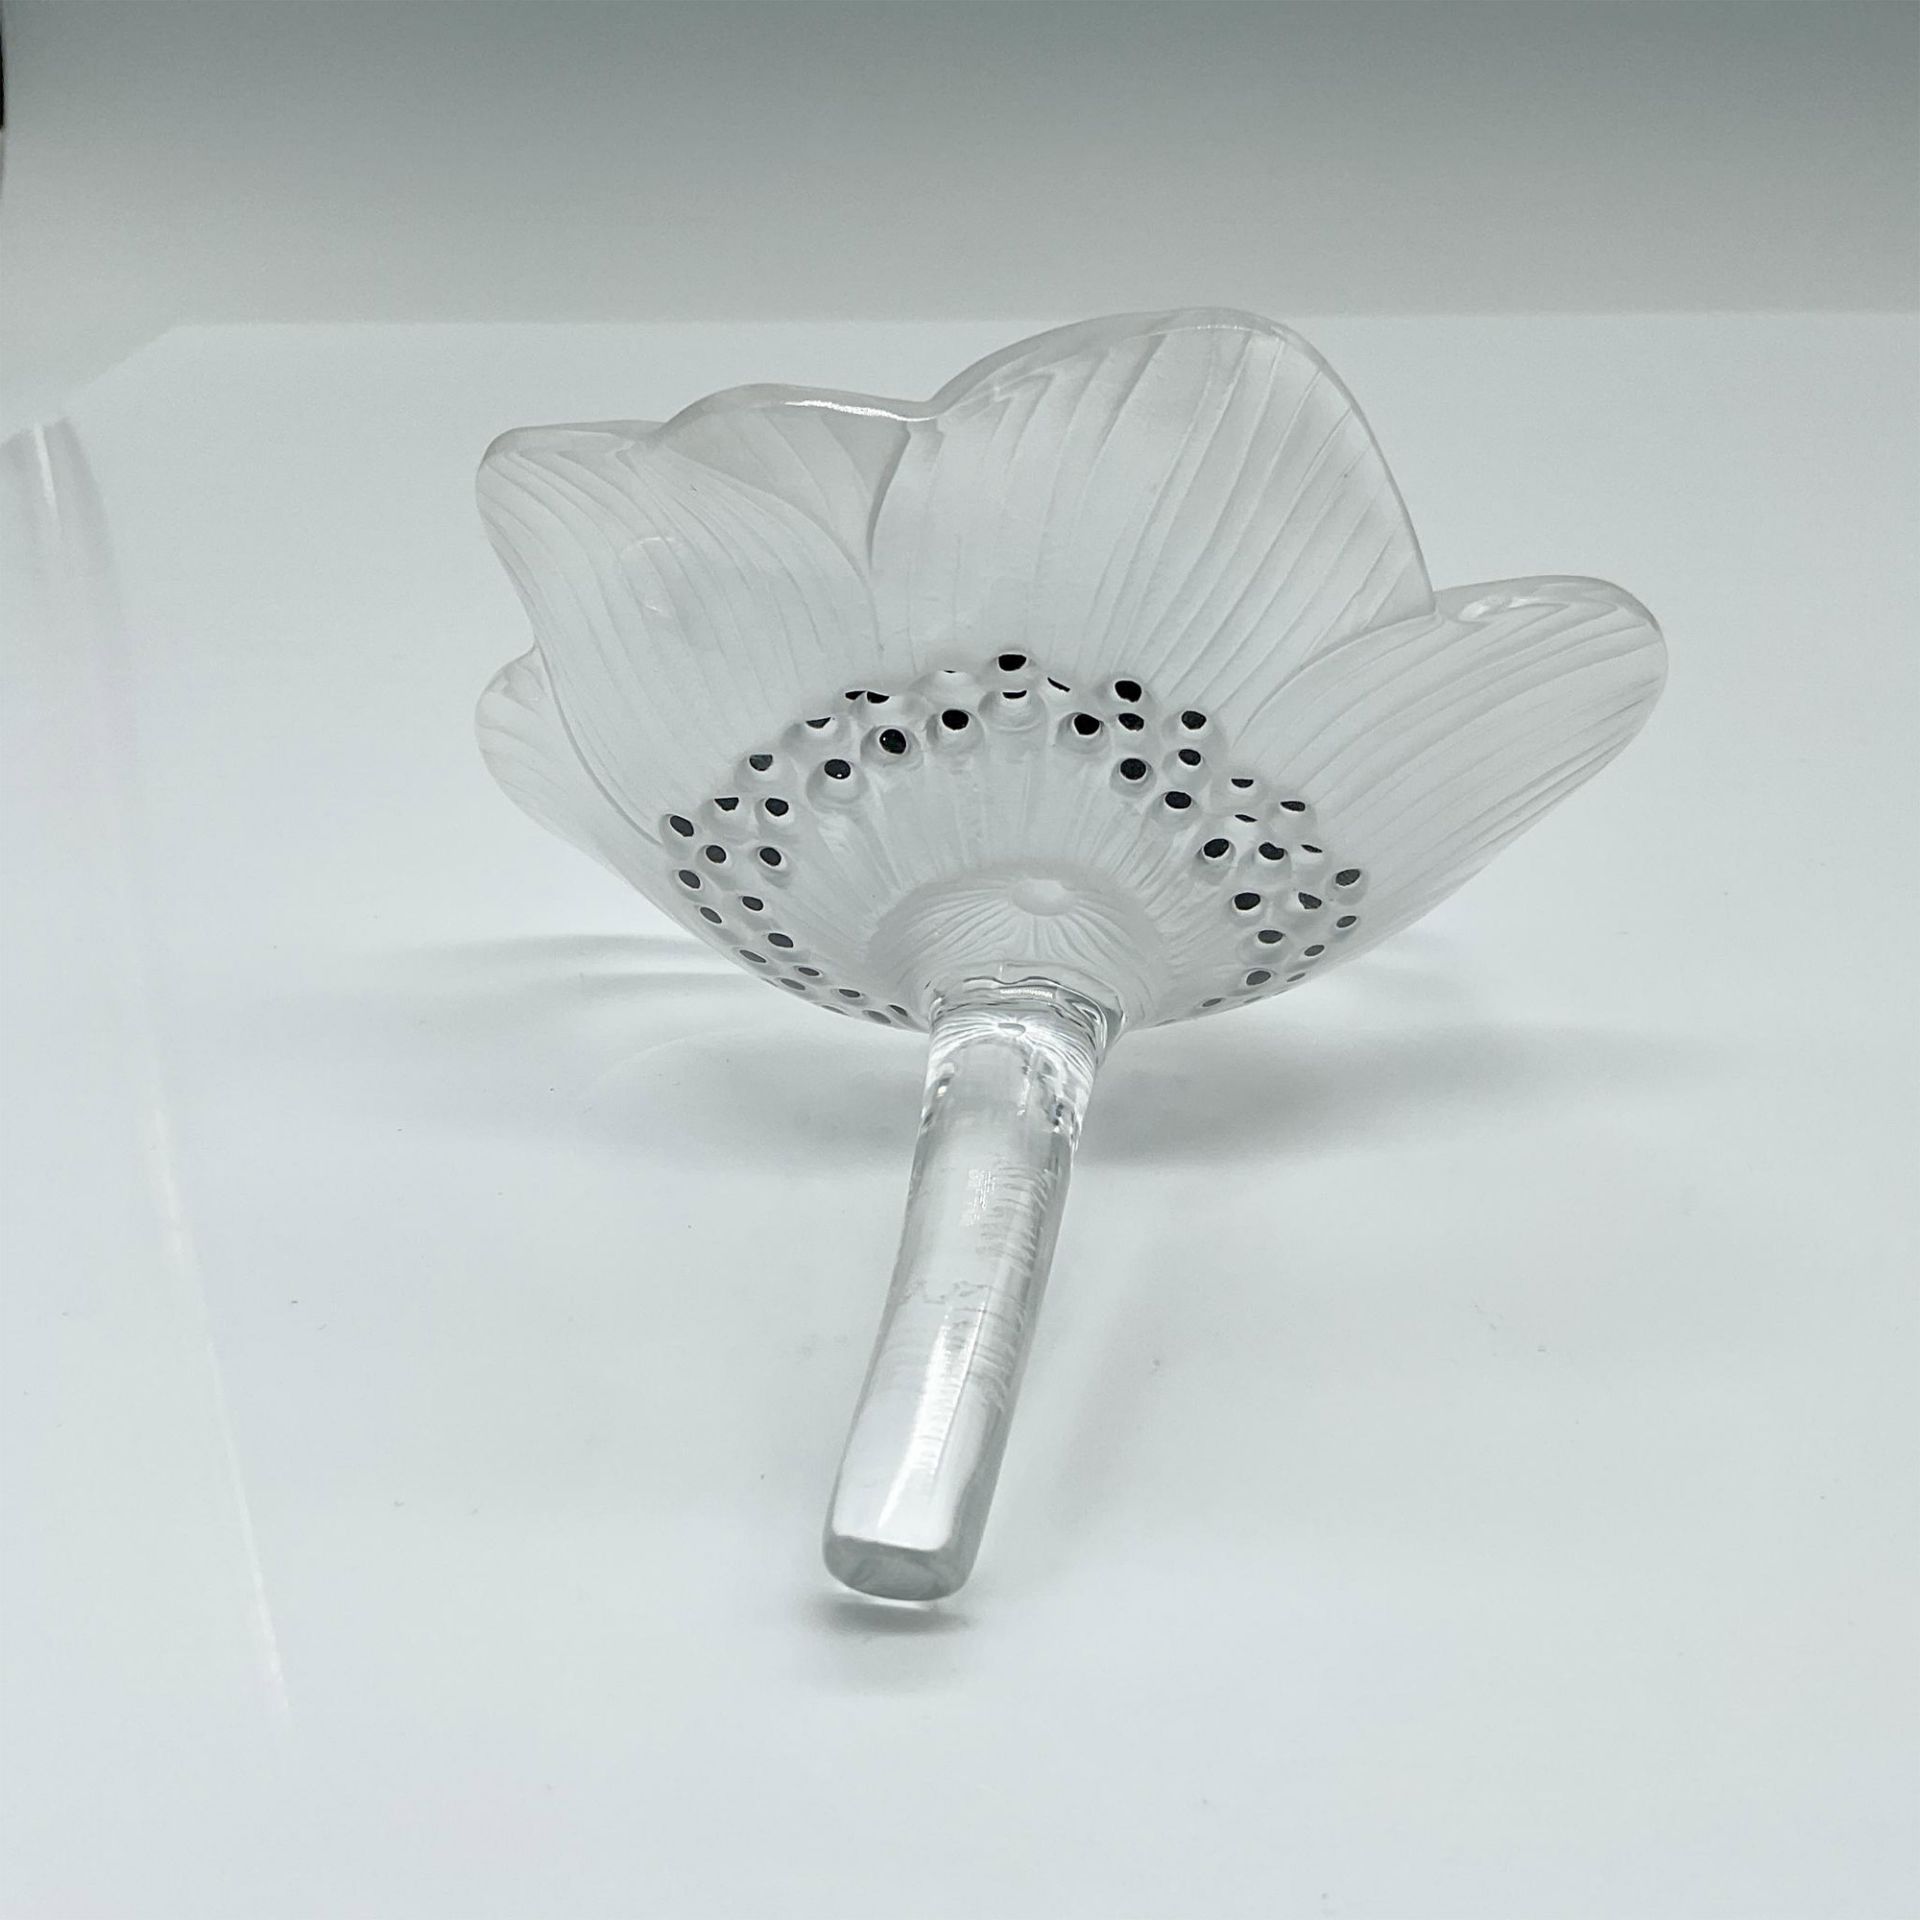 Lalique Crystal Flower Sculpture, Anemone - Image 2 of 3